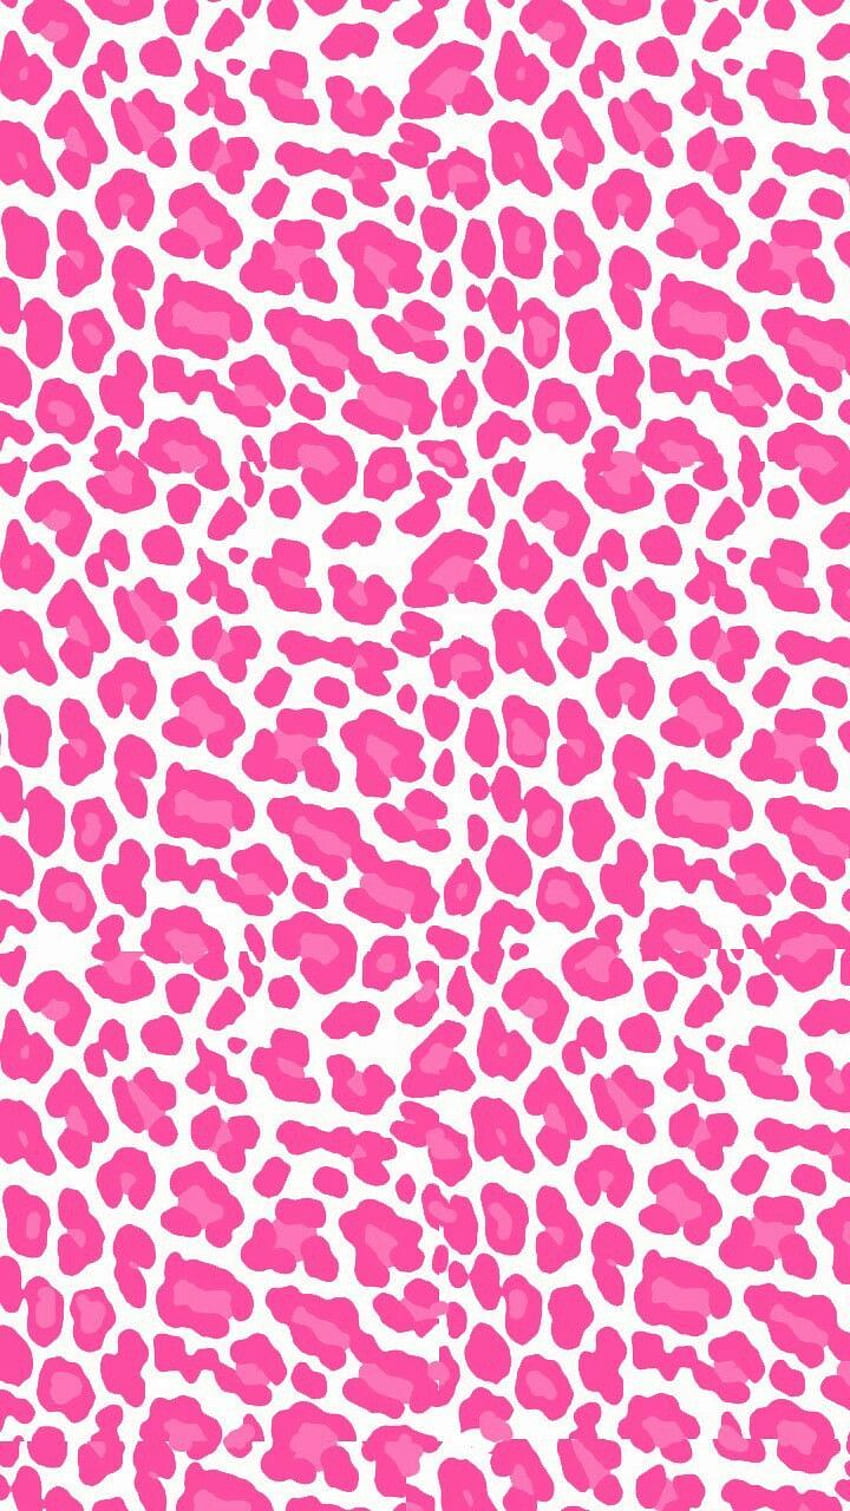 Premium Vector  Pink leopard skin seamless pattern wild african cats  repeat illustration abstract cheetah fur wallpaper design for fabric   textile print surface wrapping cover